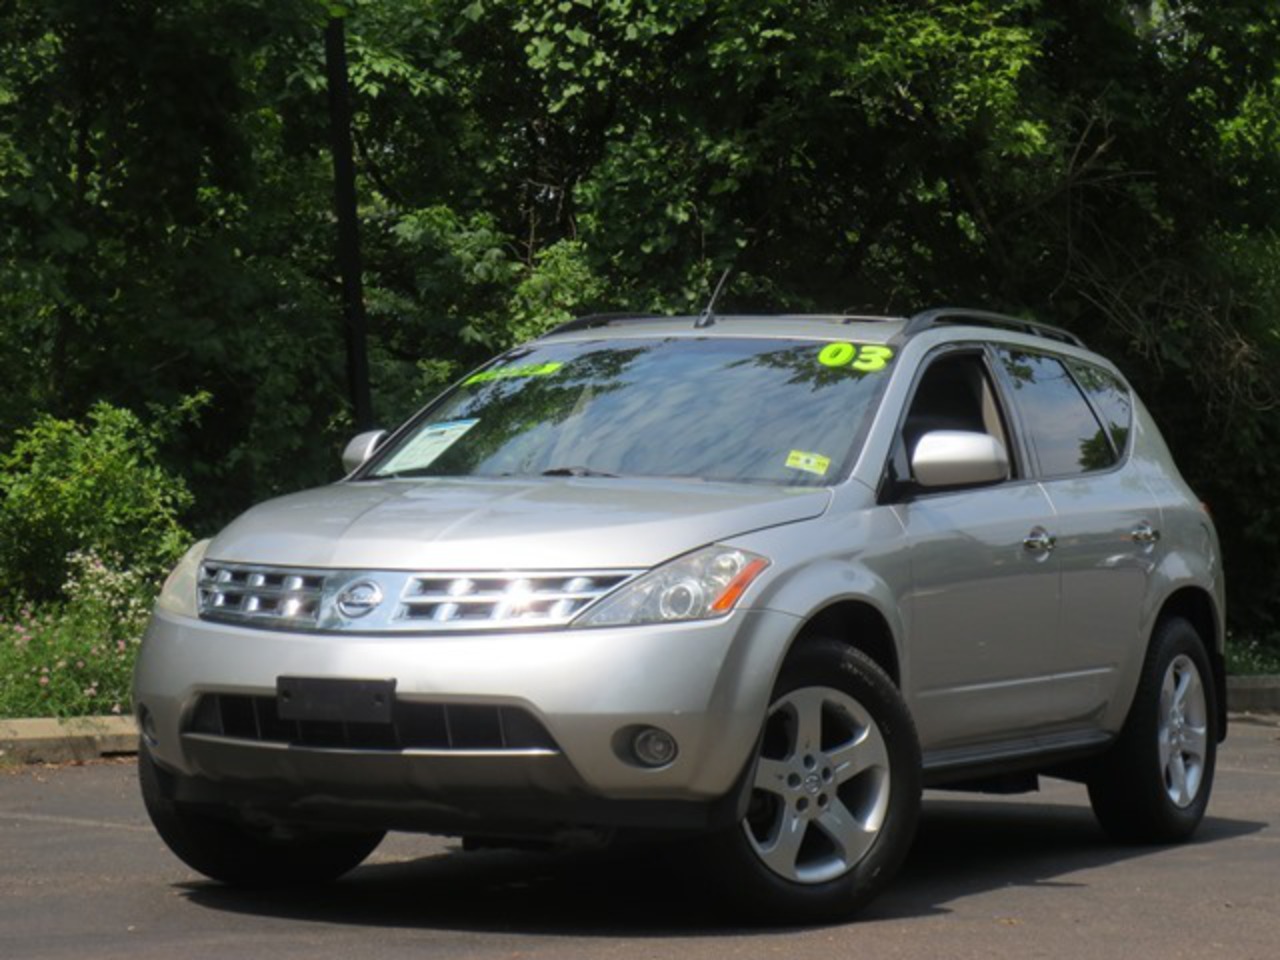 Nissan Murano 35 SL AWD / Search in Store - Specs, Videos, Photos ...